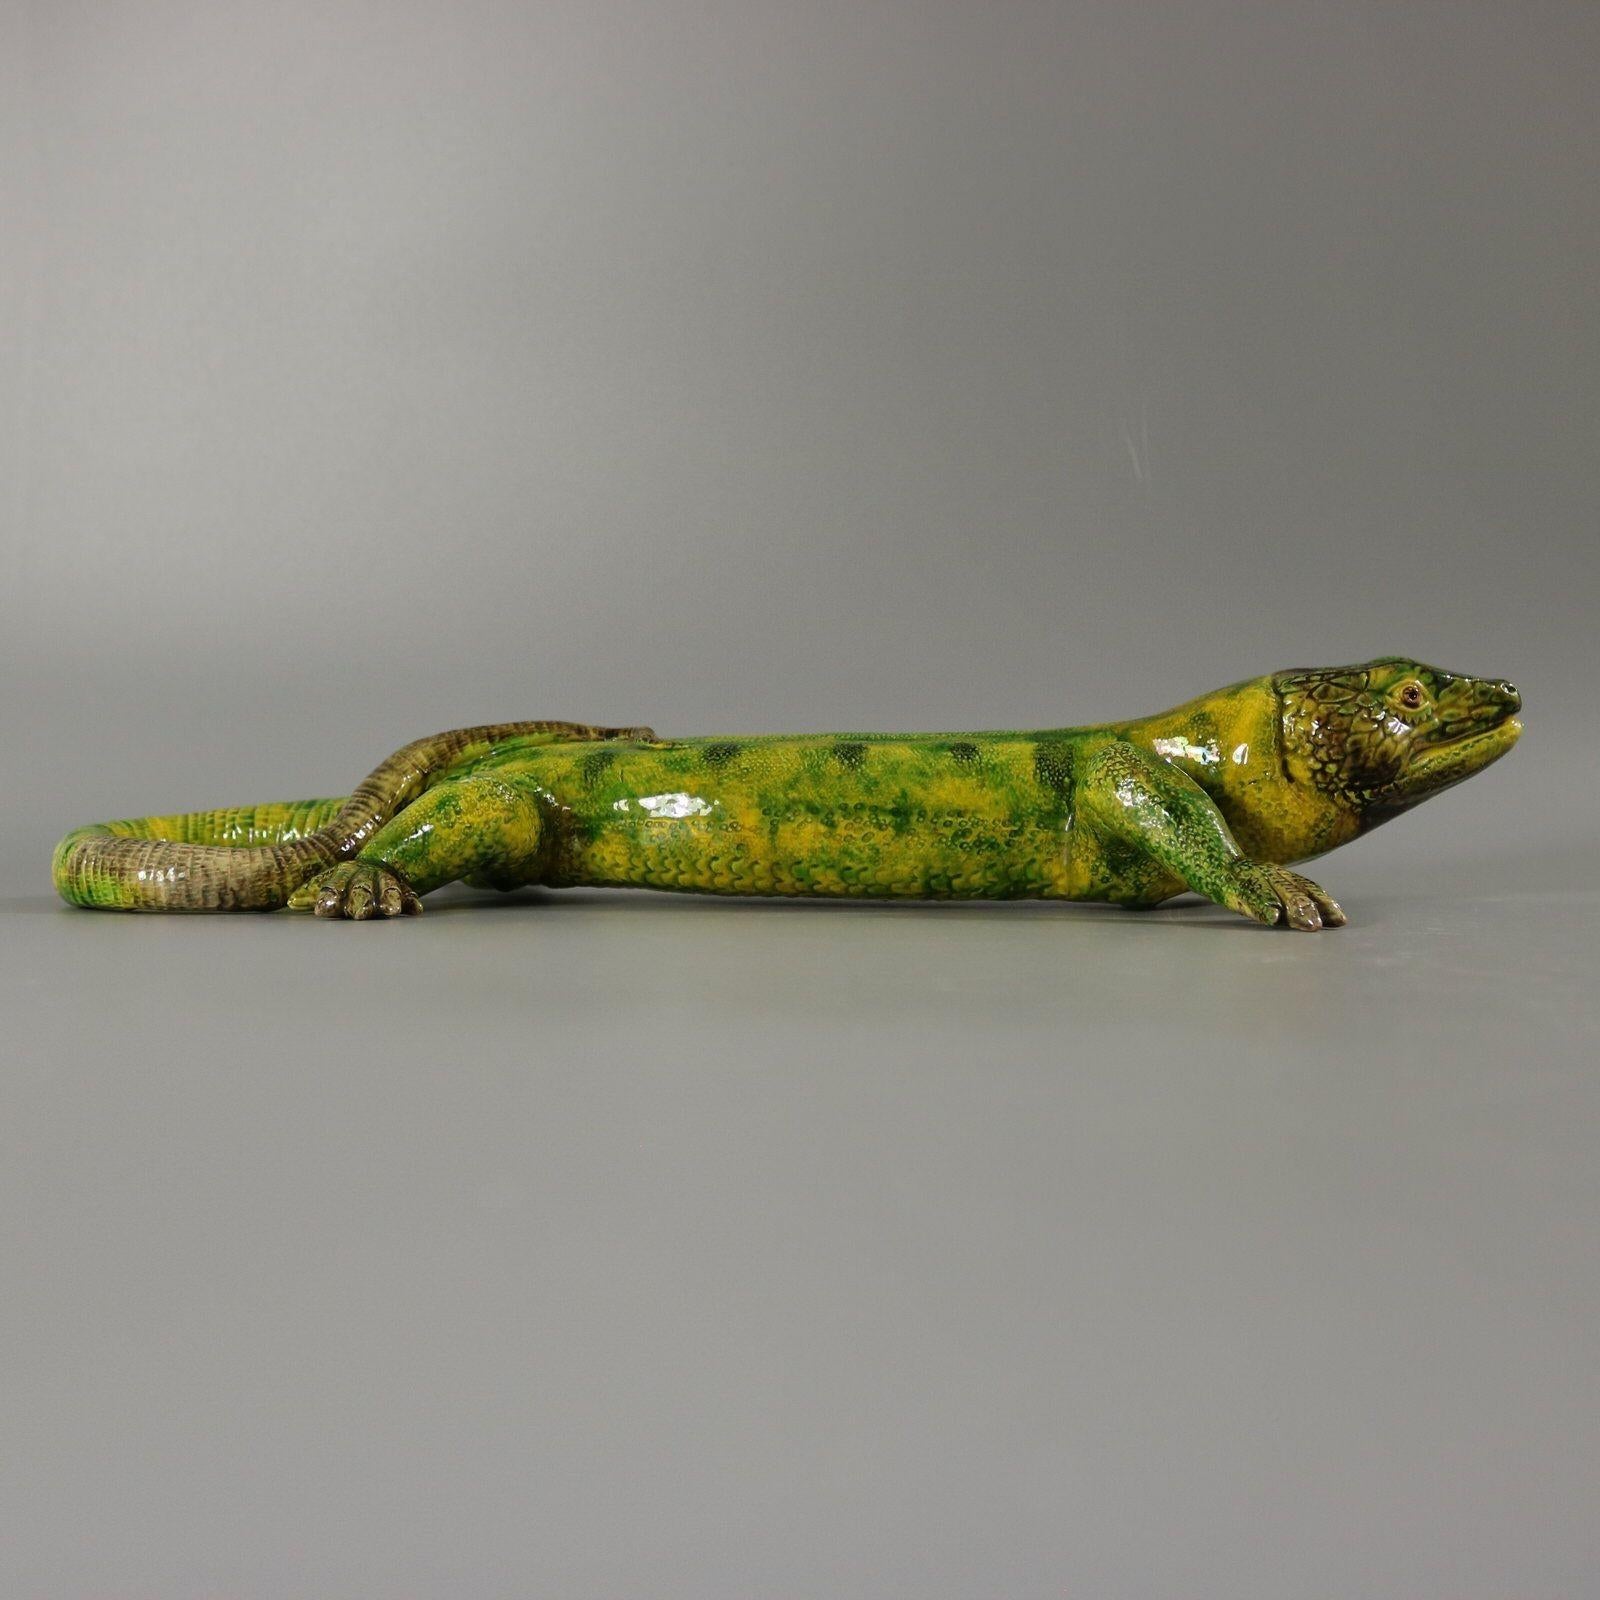 Portuguese Palissy Majolica wall figure which features a lizard with it's tail curled over it's back. Colouration: green, grey, are predominant.